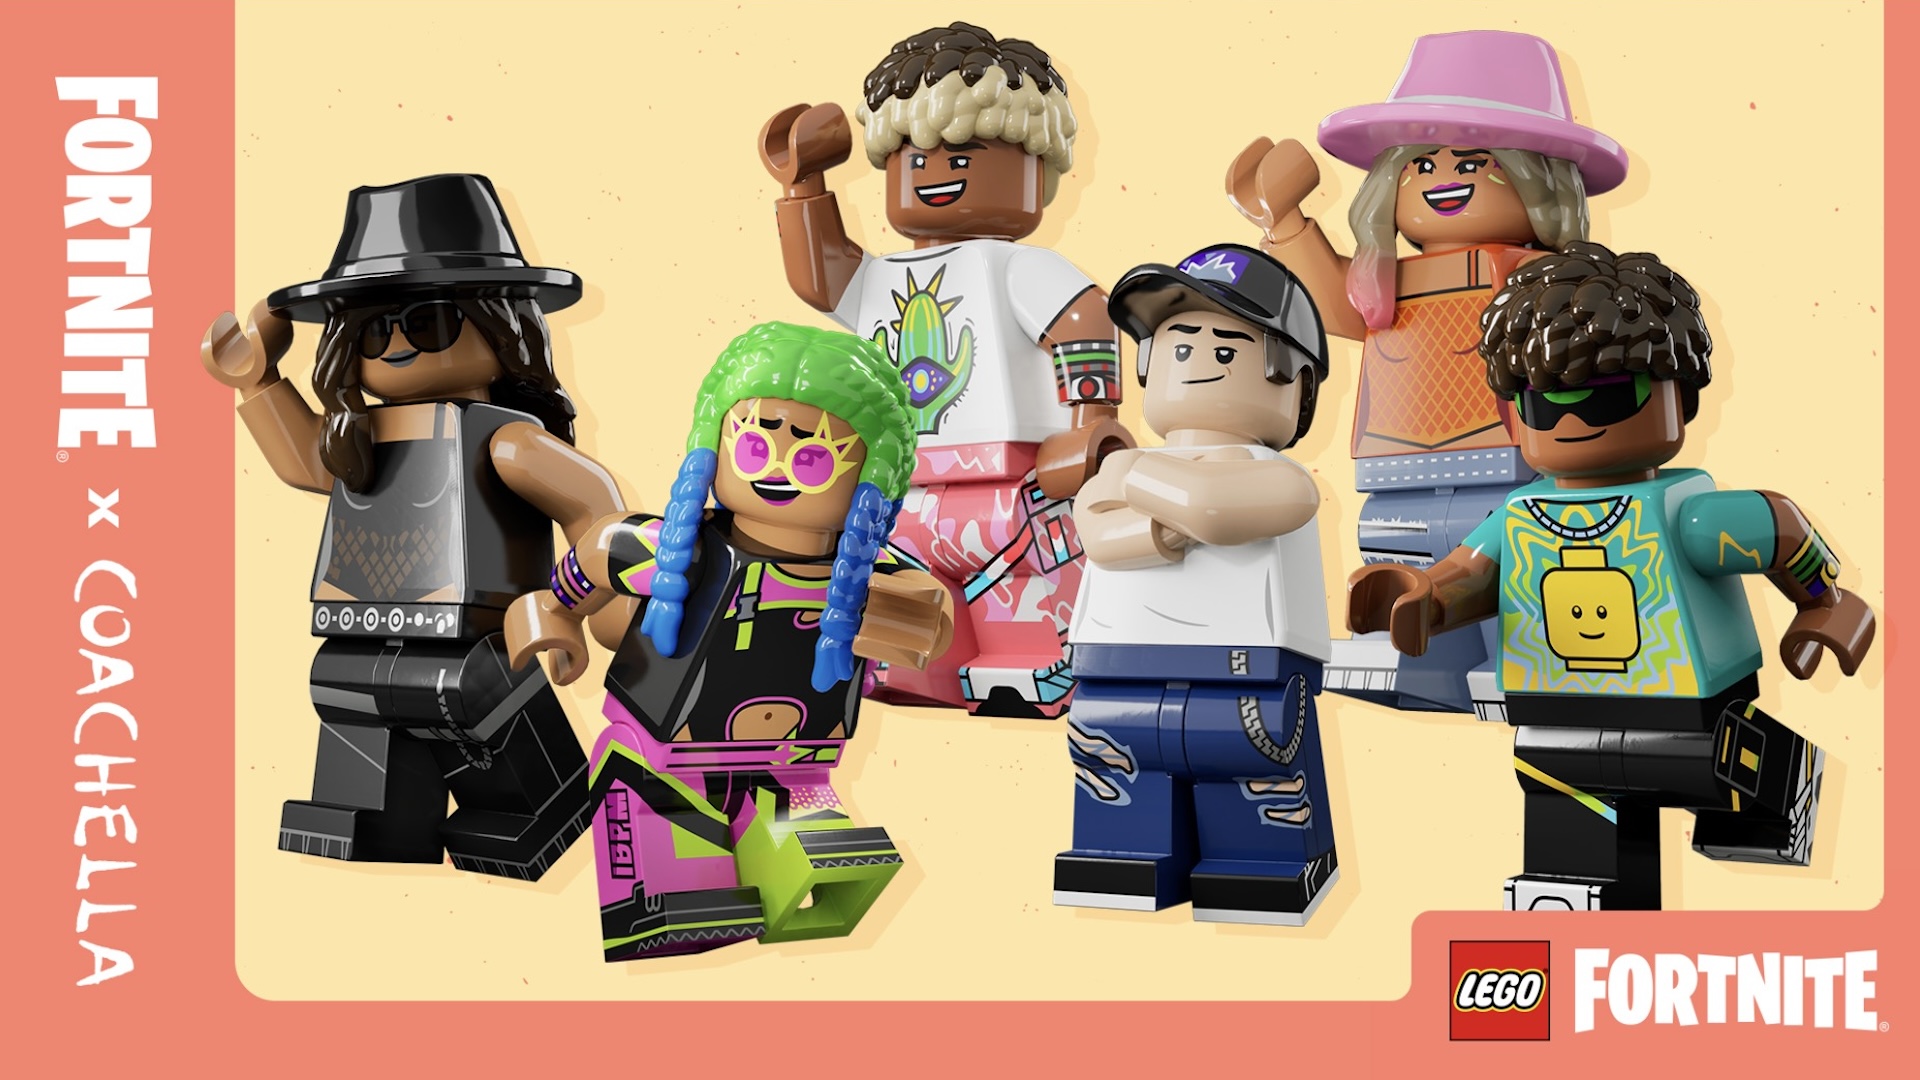 Coachella-themed Lego characters against a yellow and orange background.